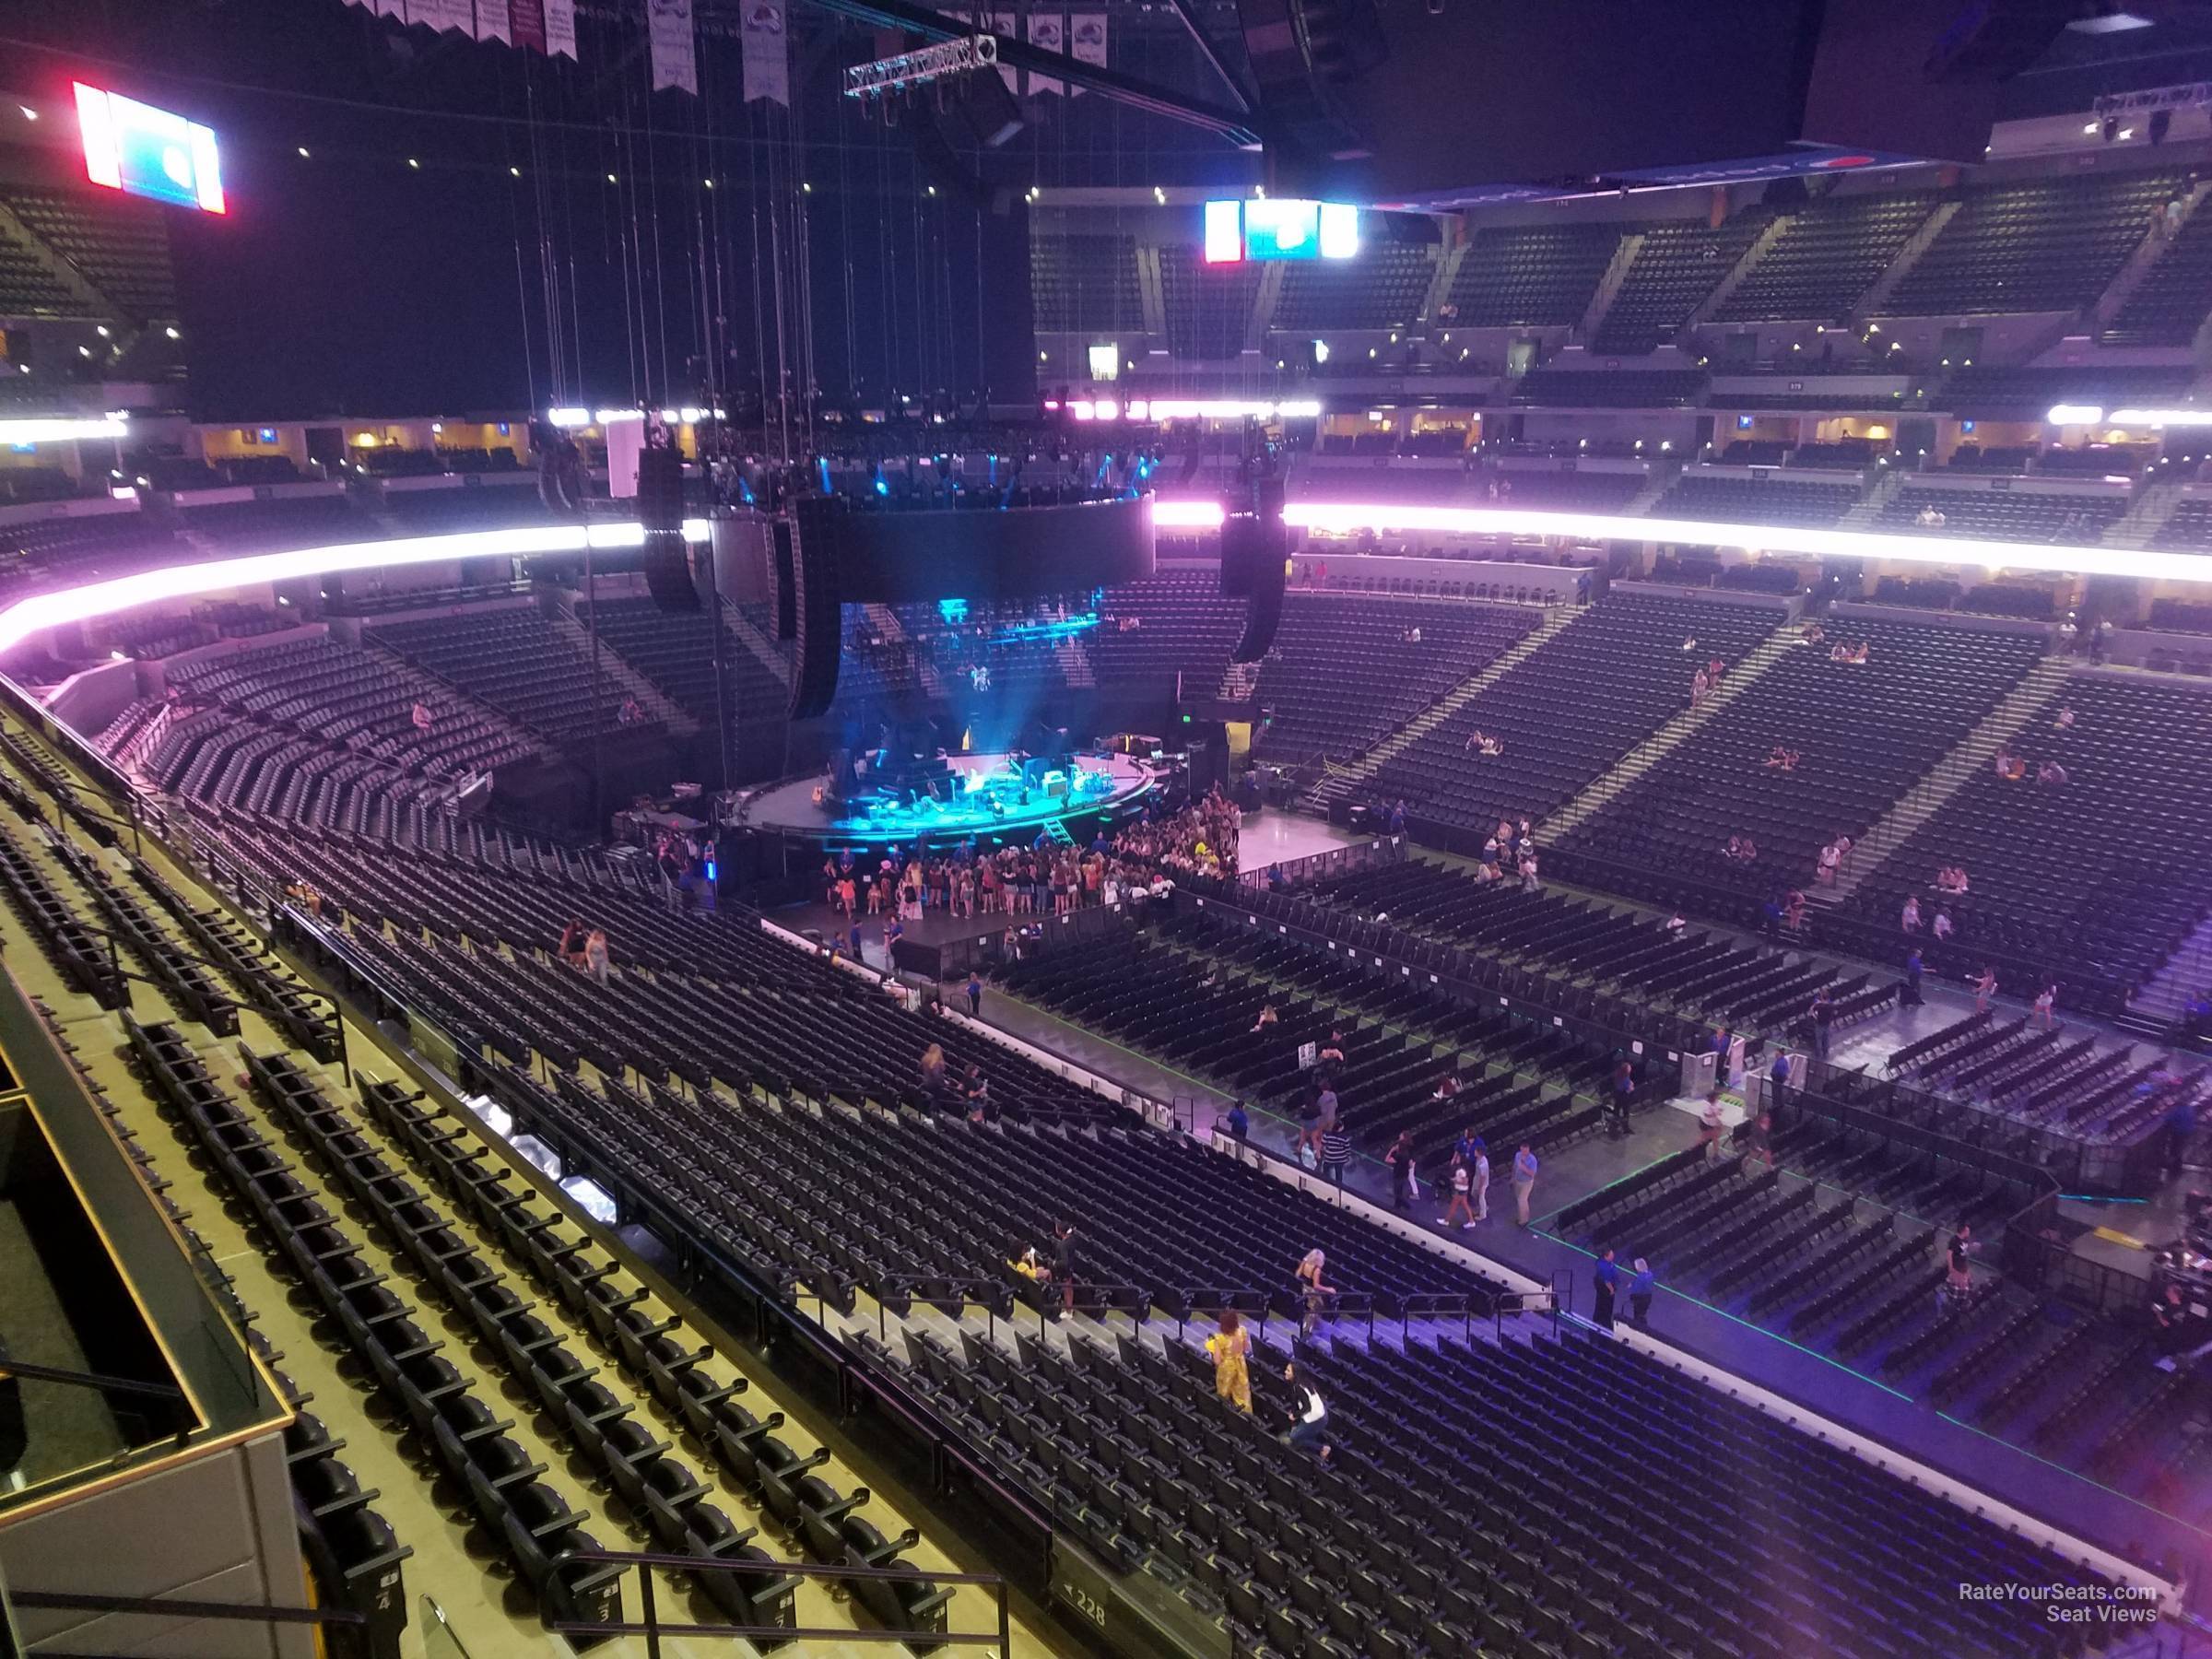 section 335, row 3 seat view  for concert - ball arena